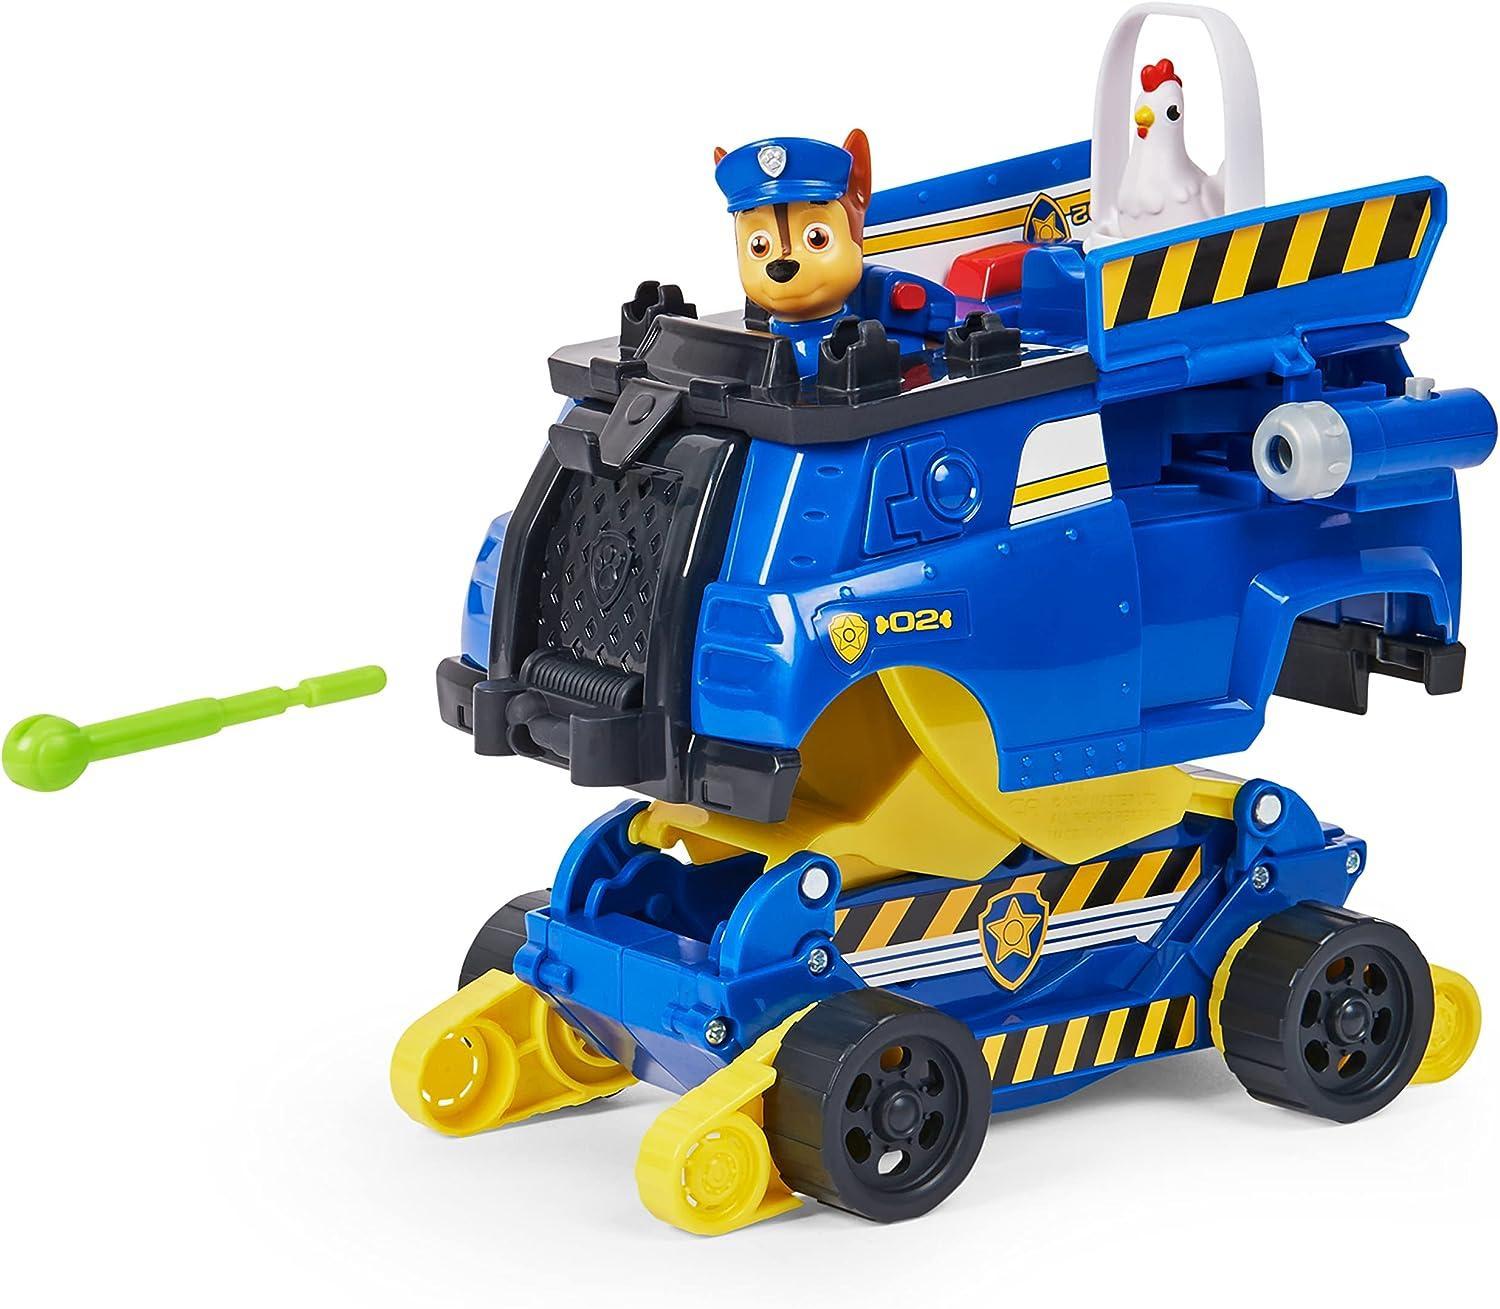 spin master paw patrol veicolo rise rescue